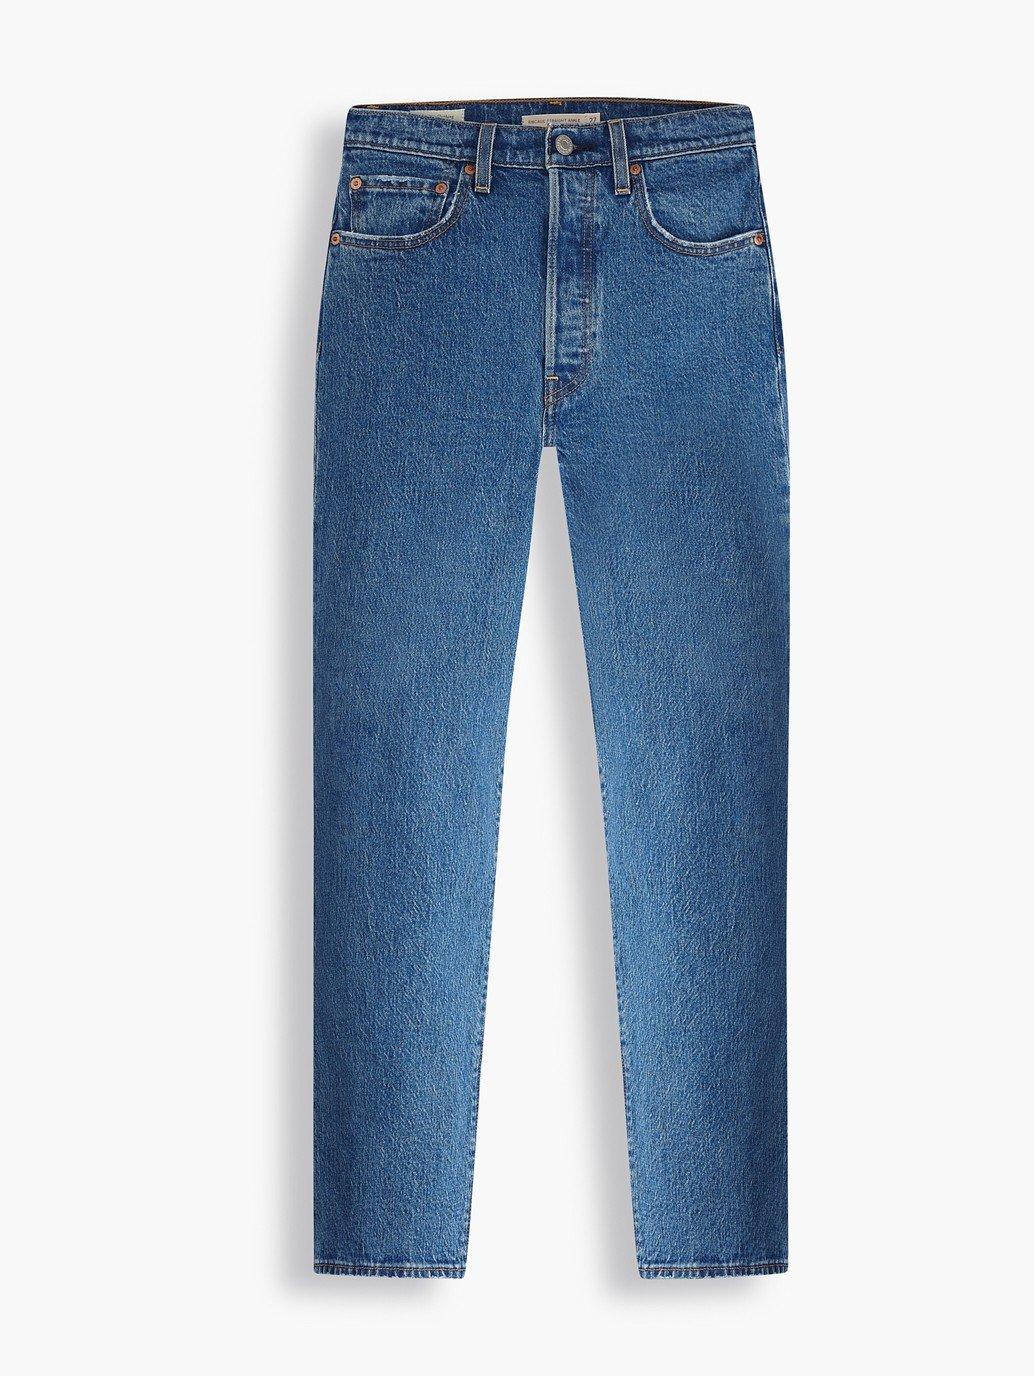 Buy Levi's® Women's Ribcage Straight Ankle Jeans| Levi's Official ...